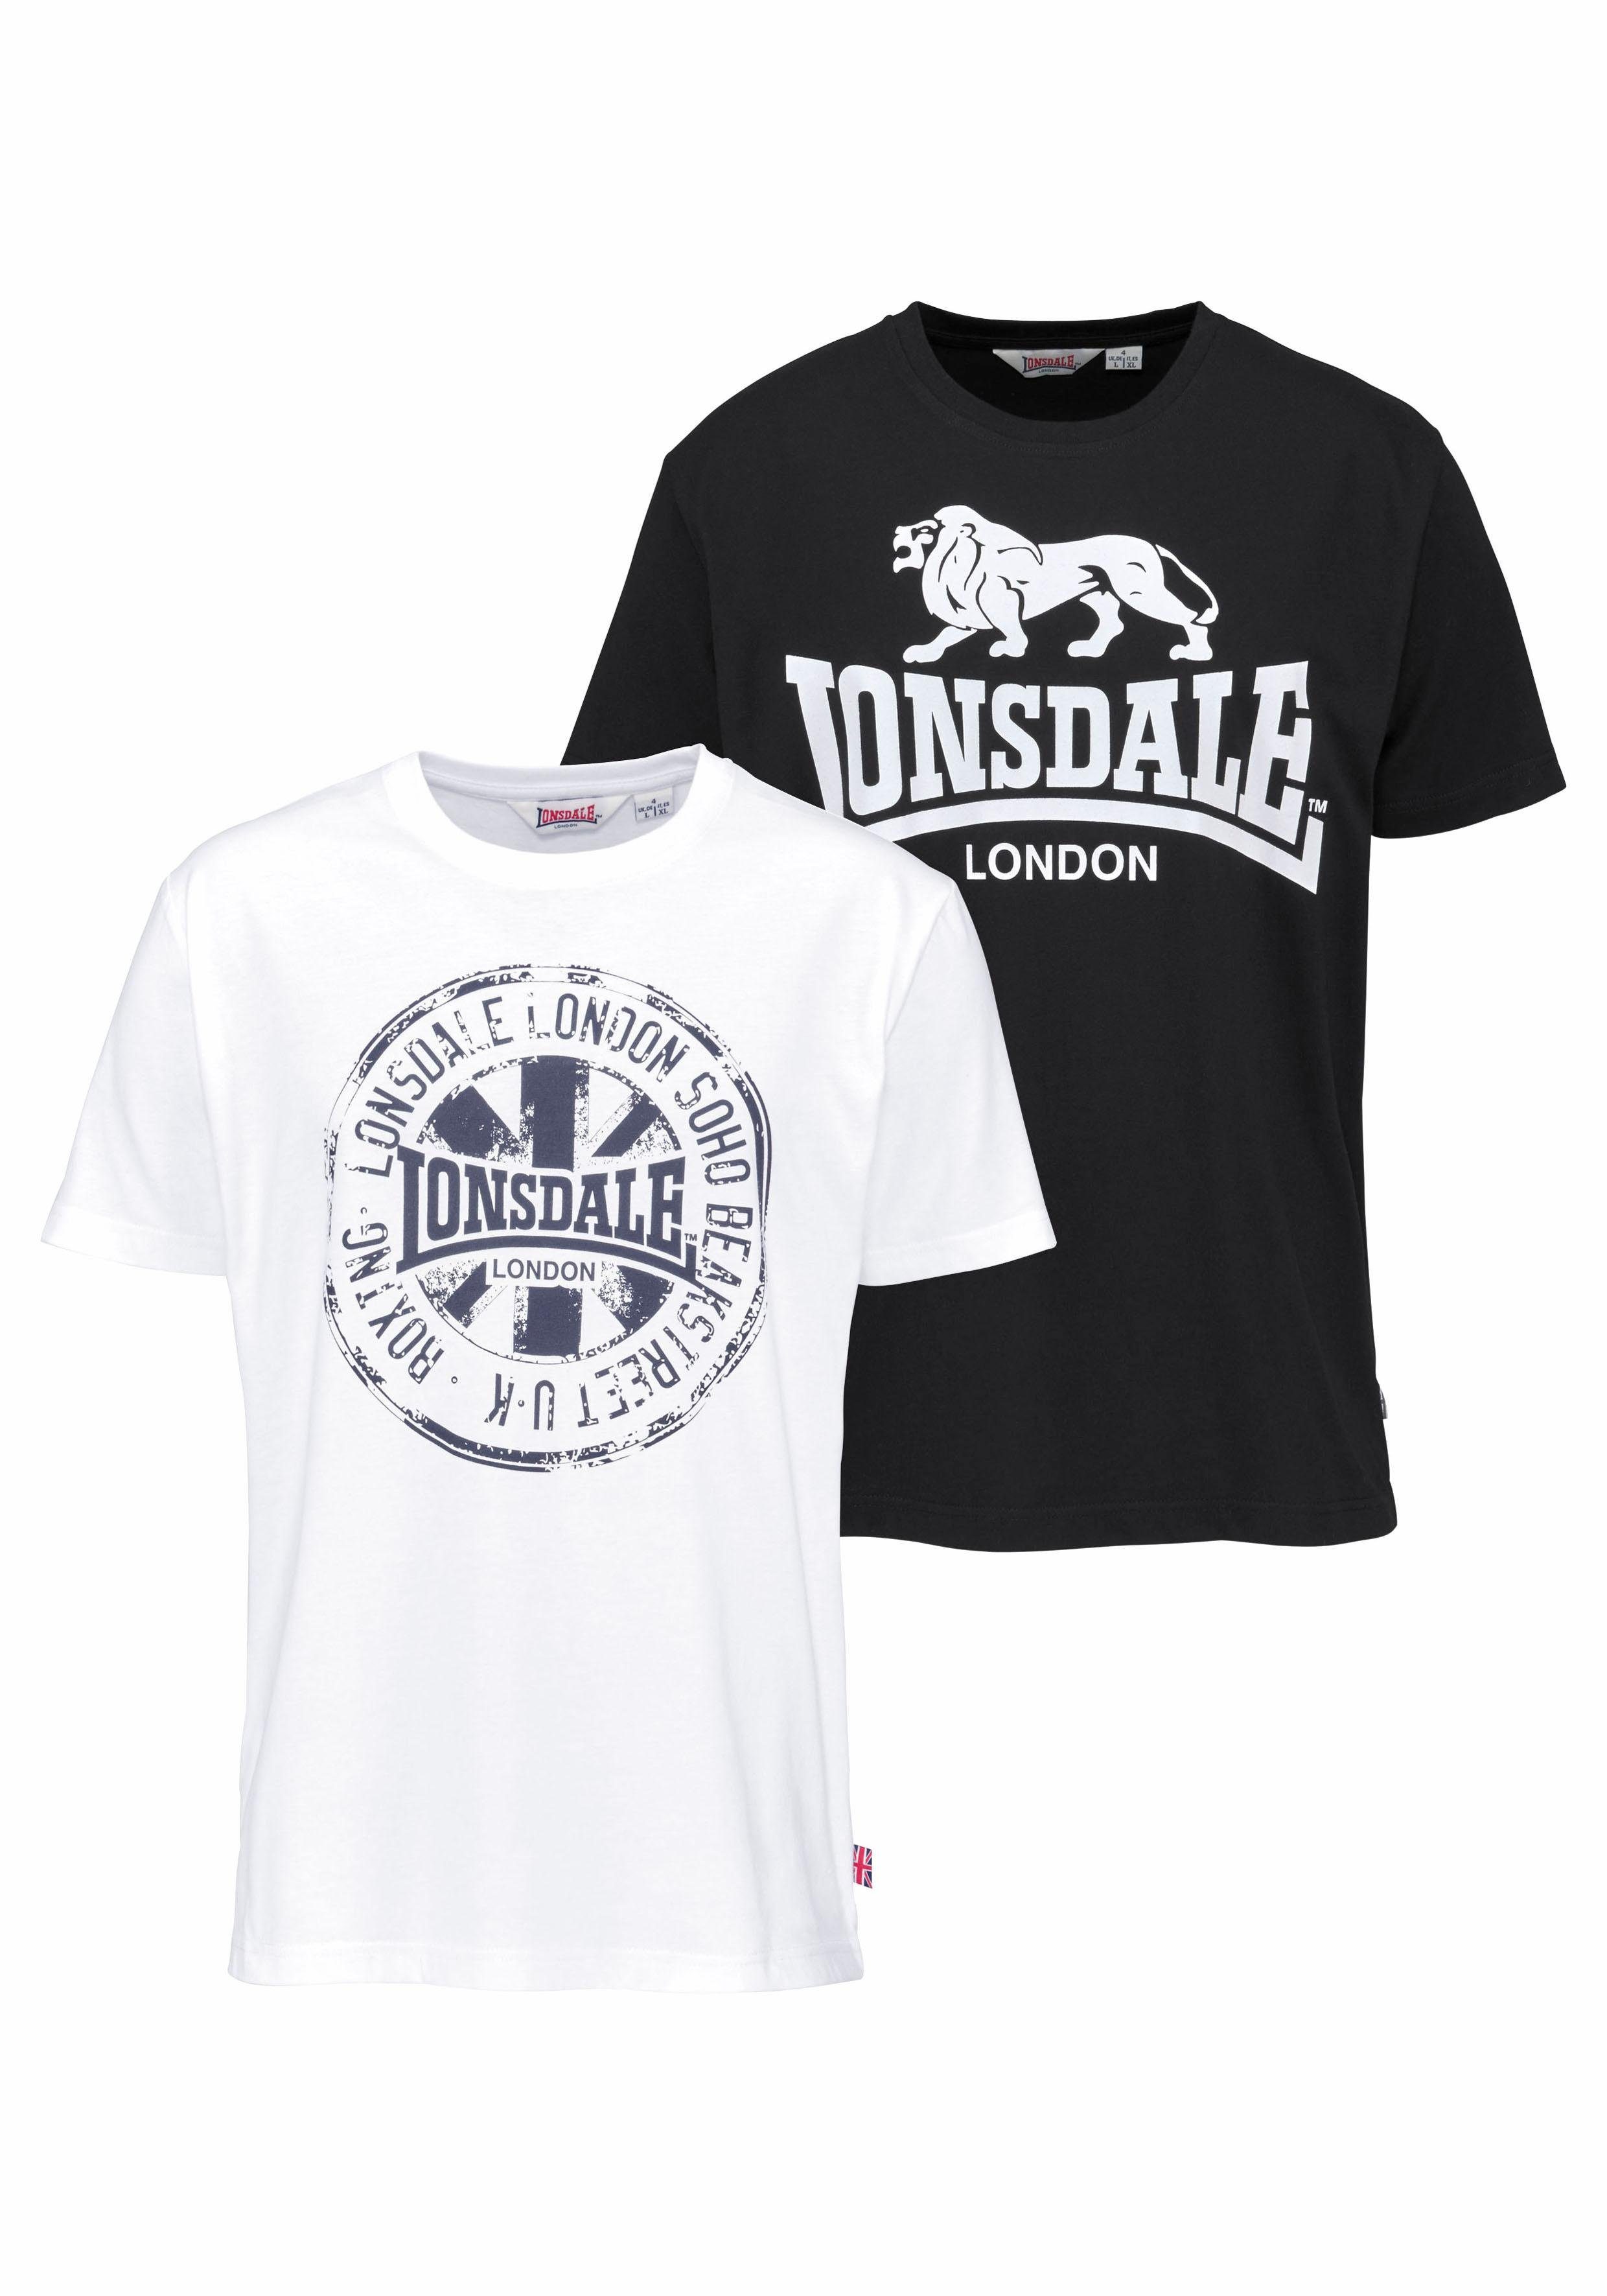 2-tlg., T-Shirt Lonsdale 2er-Pack) (Packung, DILDAWN